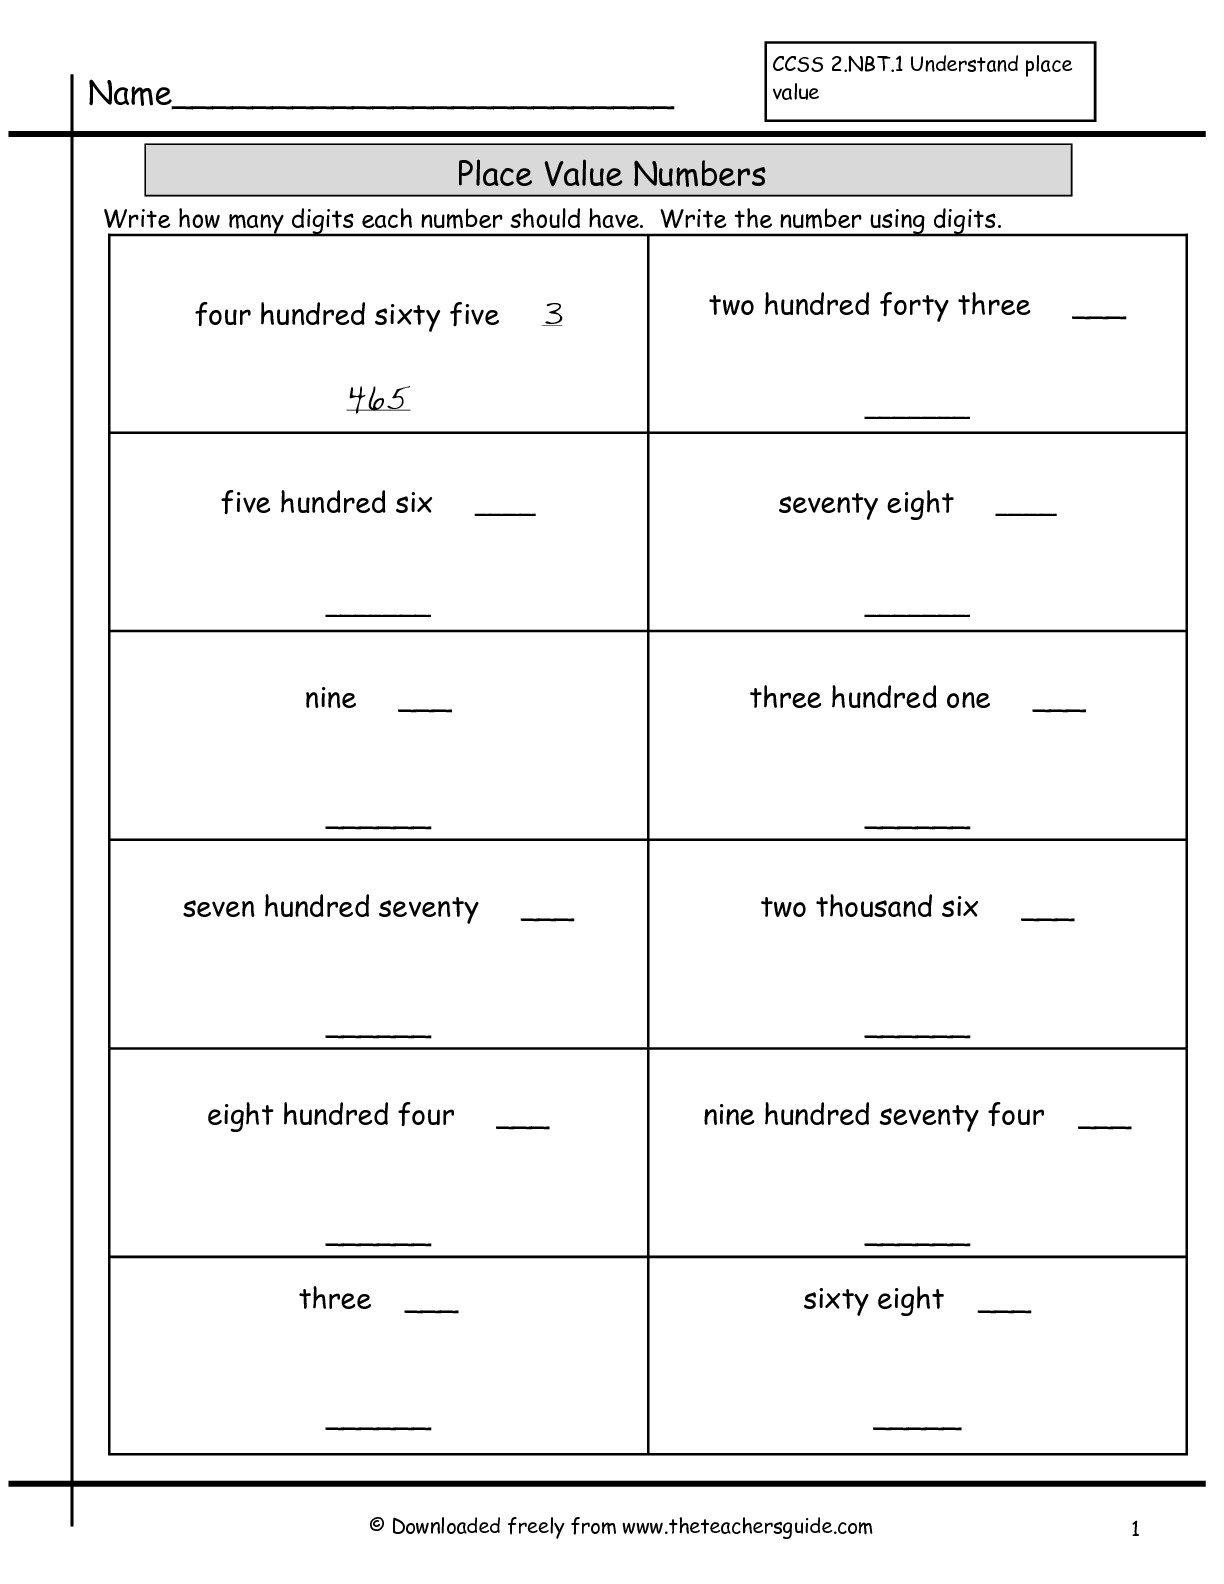 Reading and Writing Numbers Worksheets Image